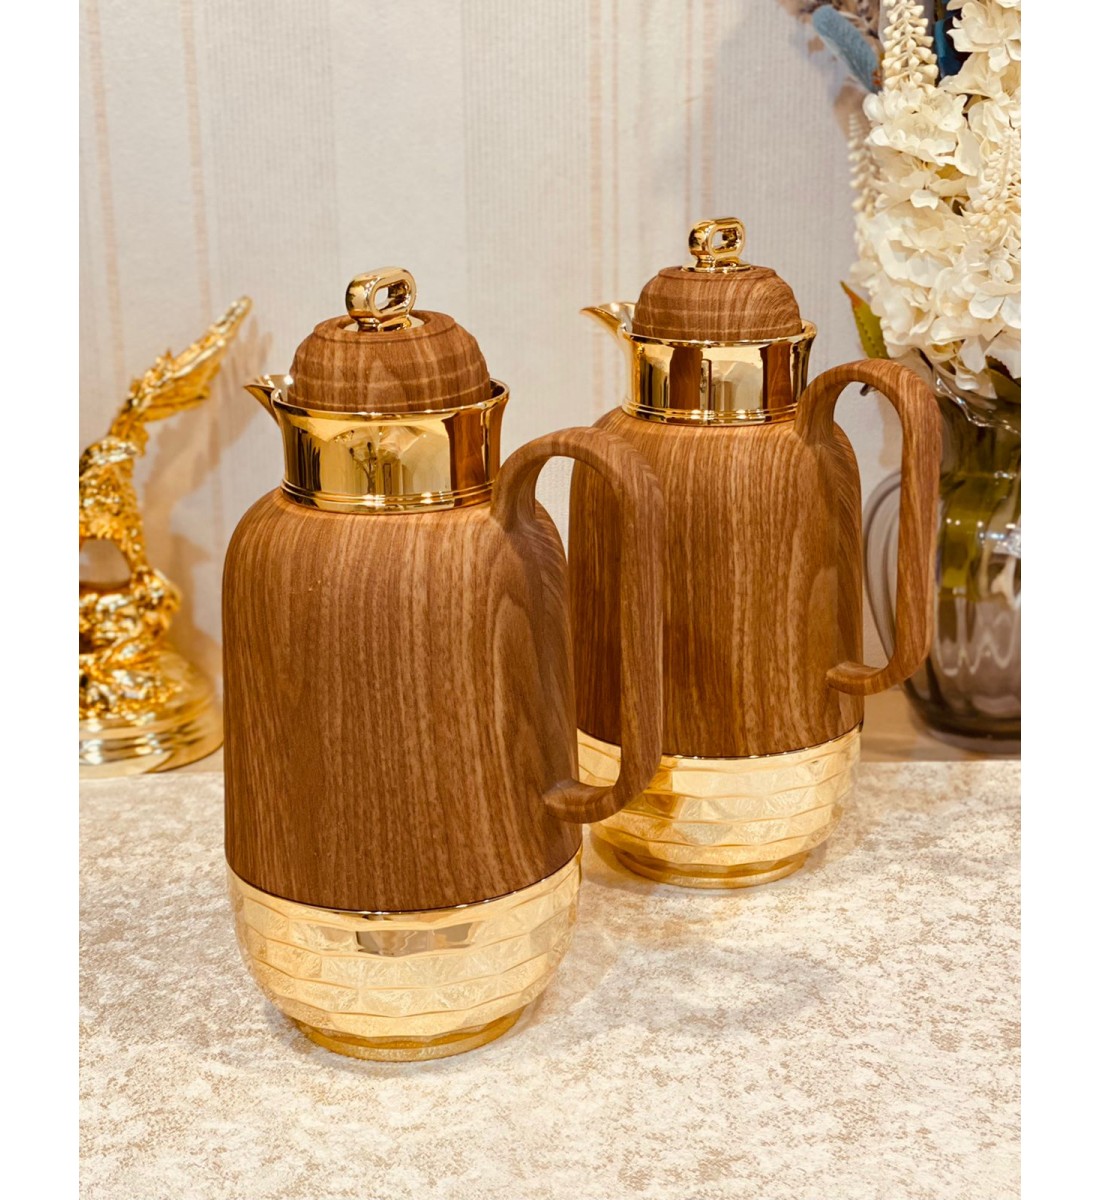 Lana Thermos Set - 2 Pieces of Gilded Wooden